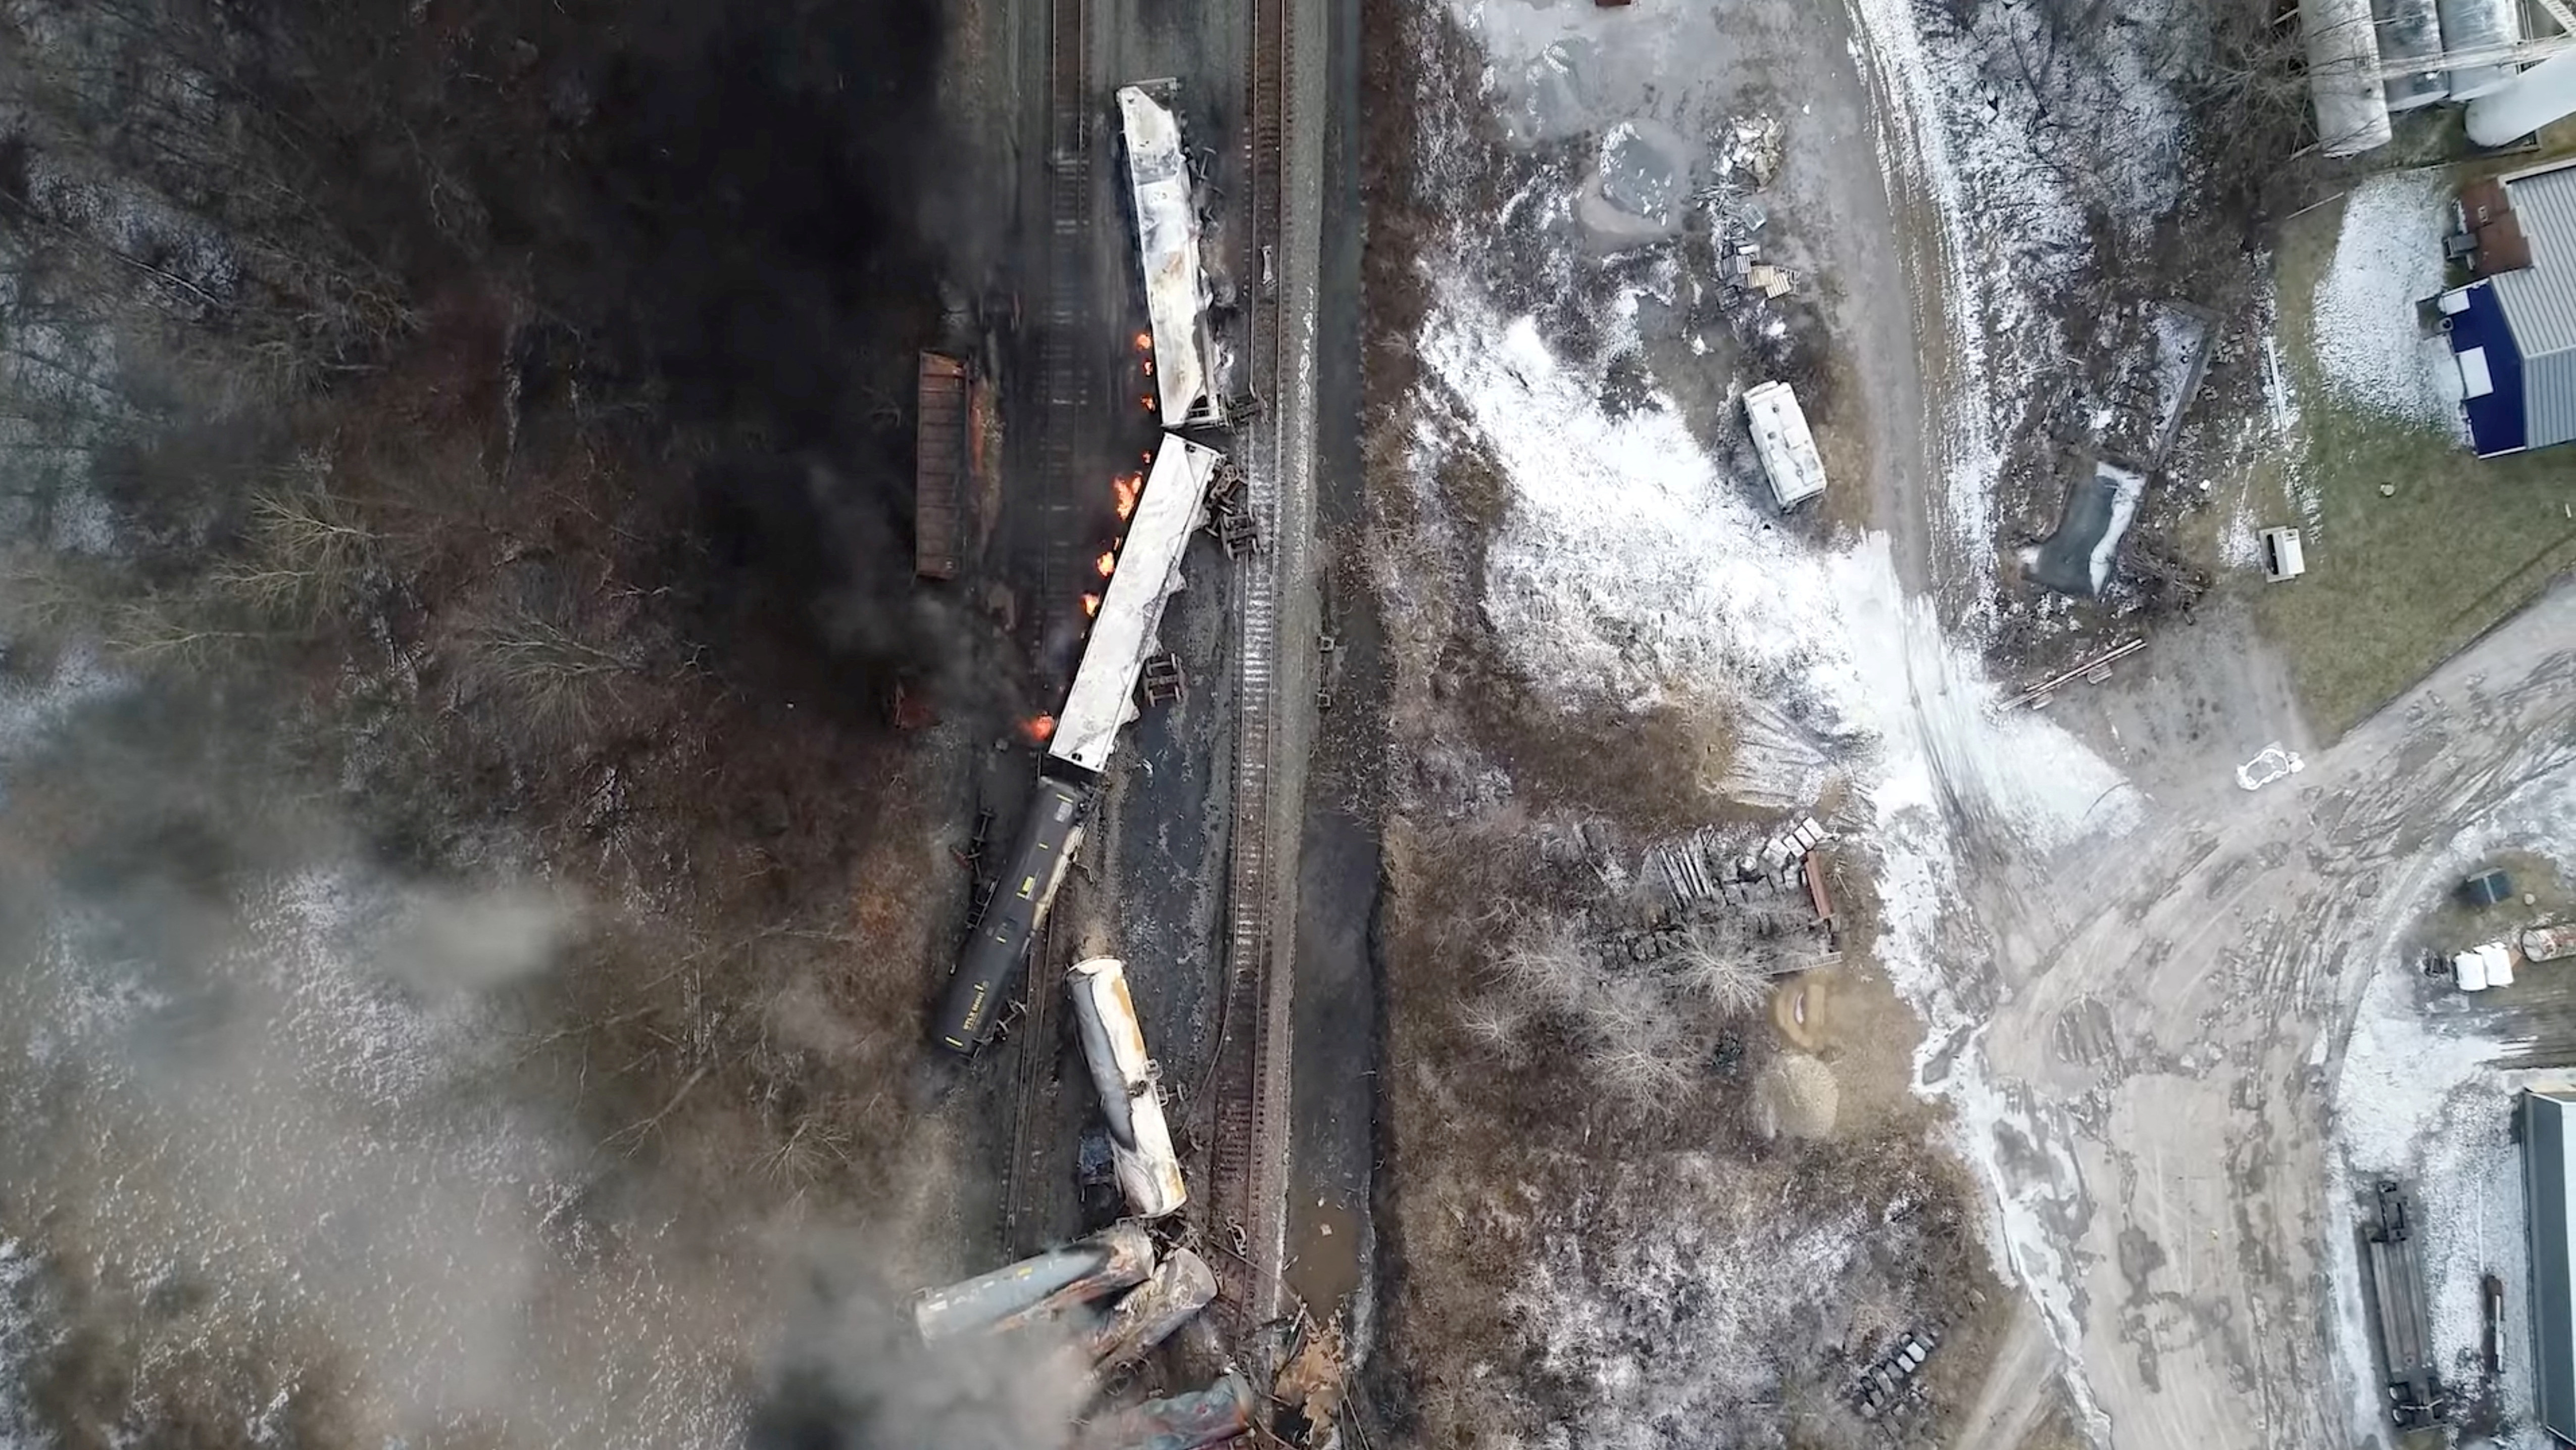 A drone footage shows the freight train derailment in East Palestine, Ohio